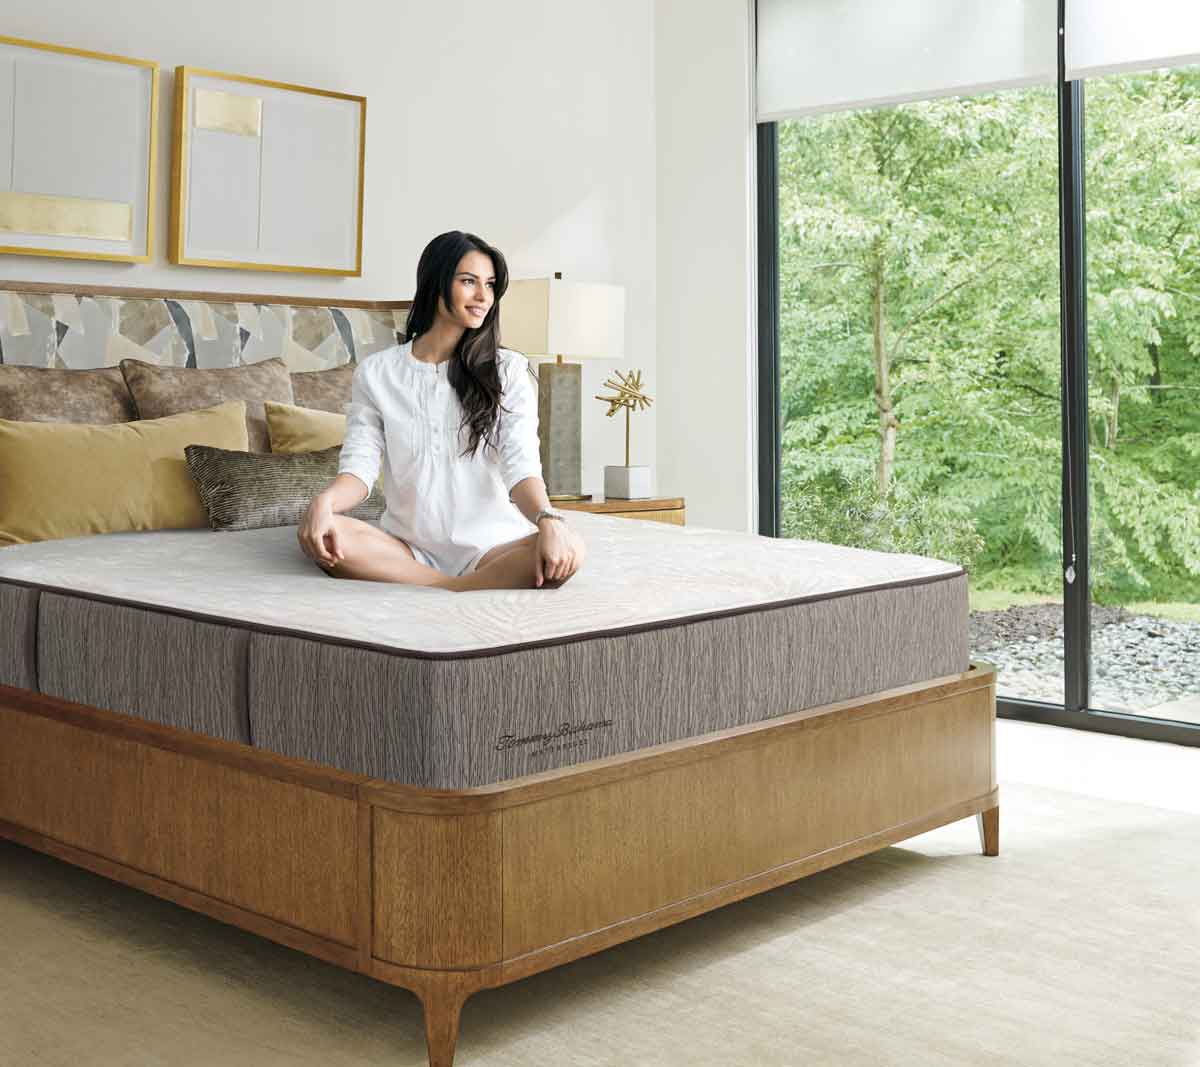 Photo of a woman sitting on her new Tommy Bahama mattress